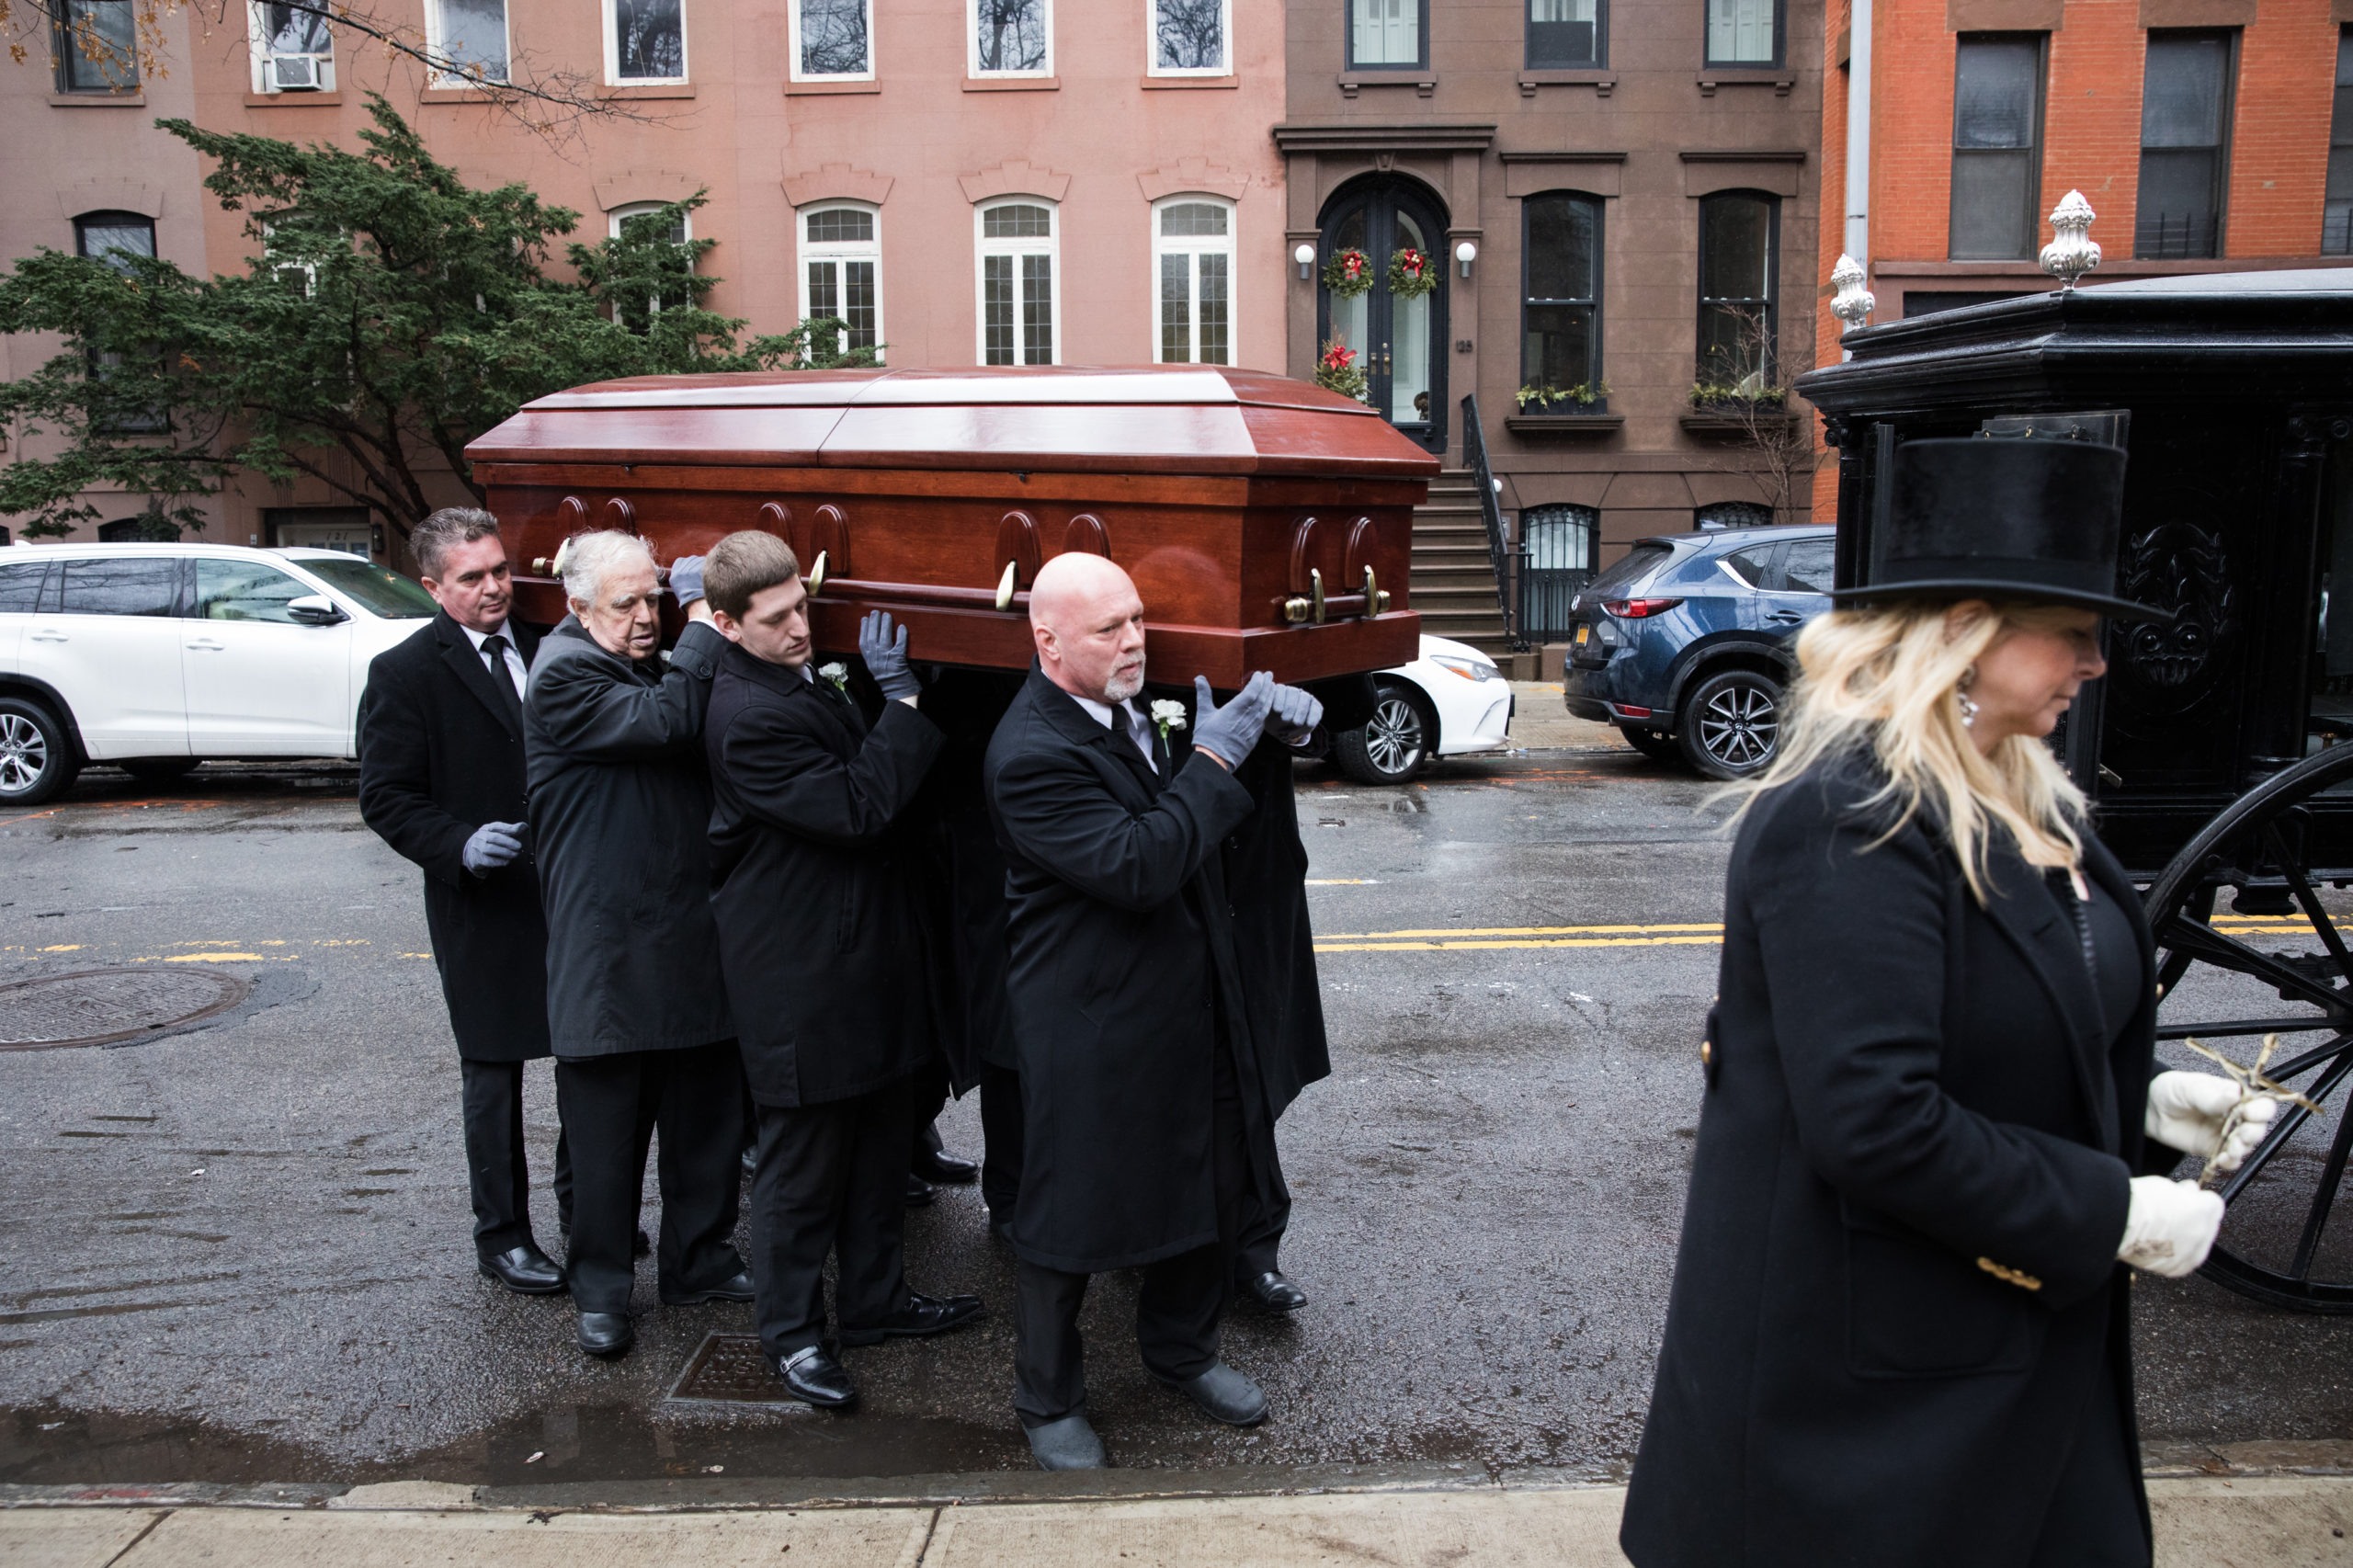 Pallbearers remove the casket from the hearse to bring it into St. Augustine's RC Church for mass.